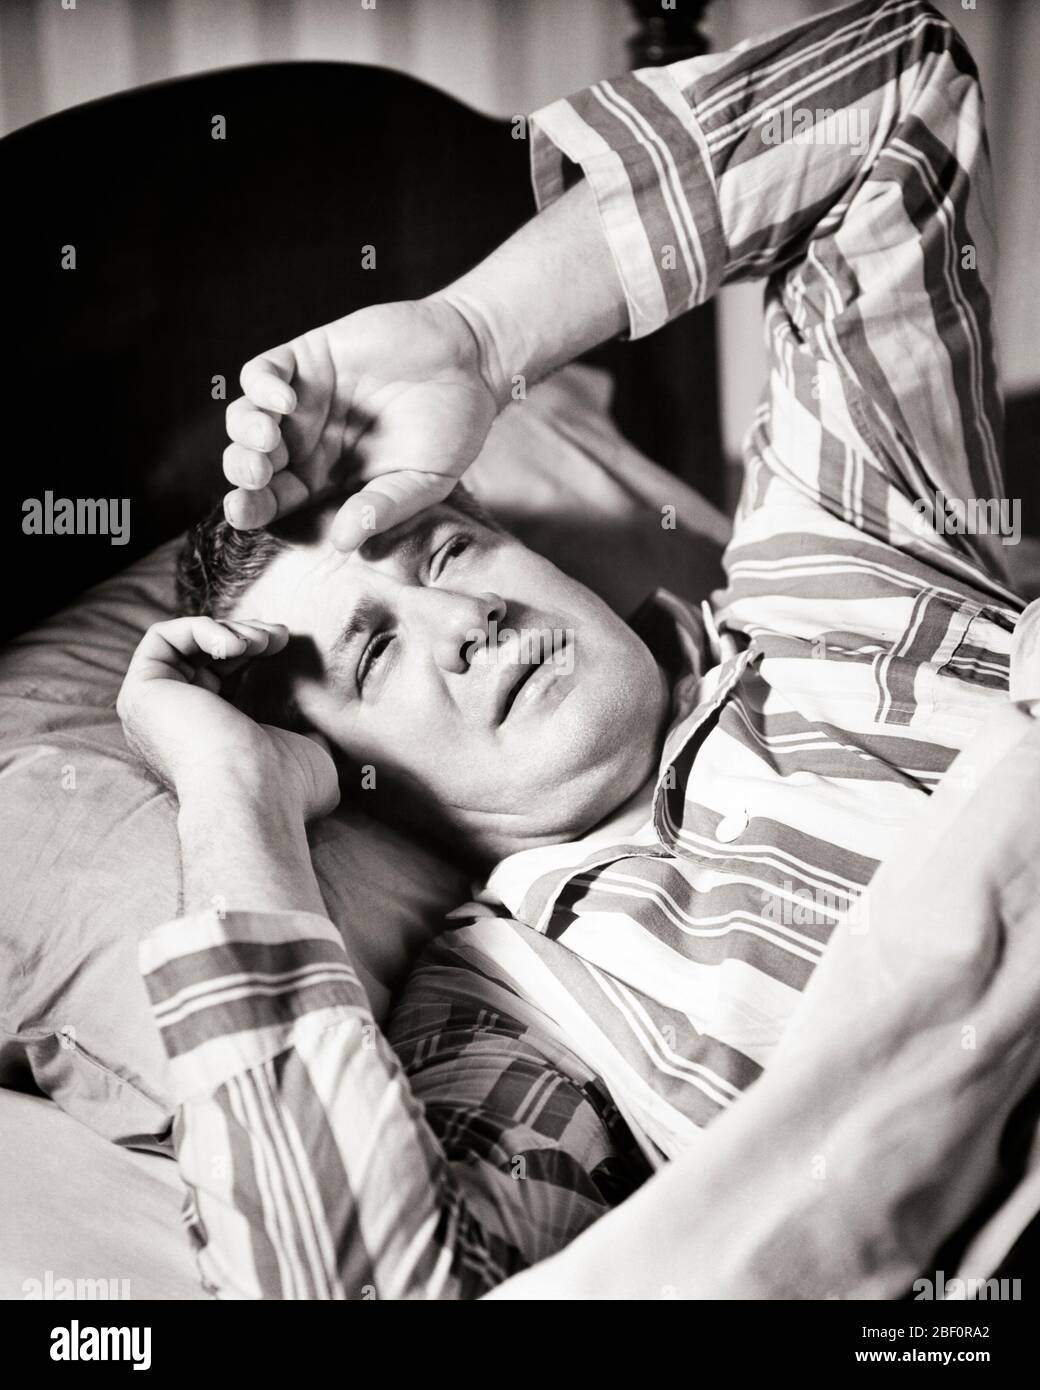 1940s MATURE MAN IN BED WEARING STRIPED PAJAMAS HAND TO FOREHEAD PAINED ...